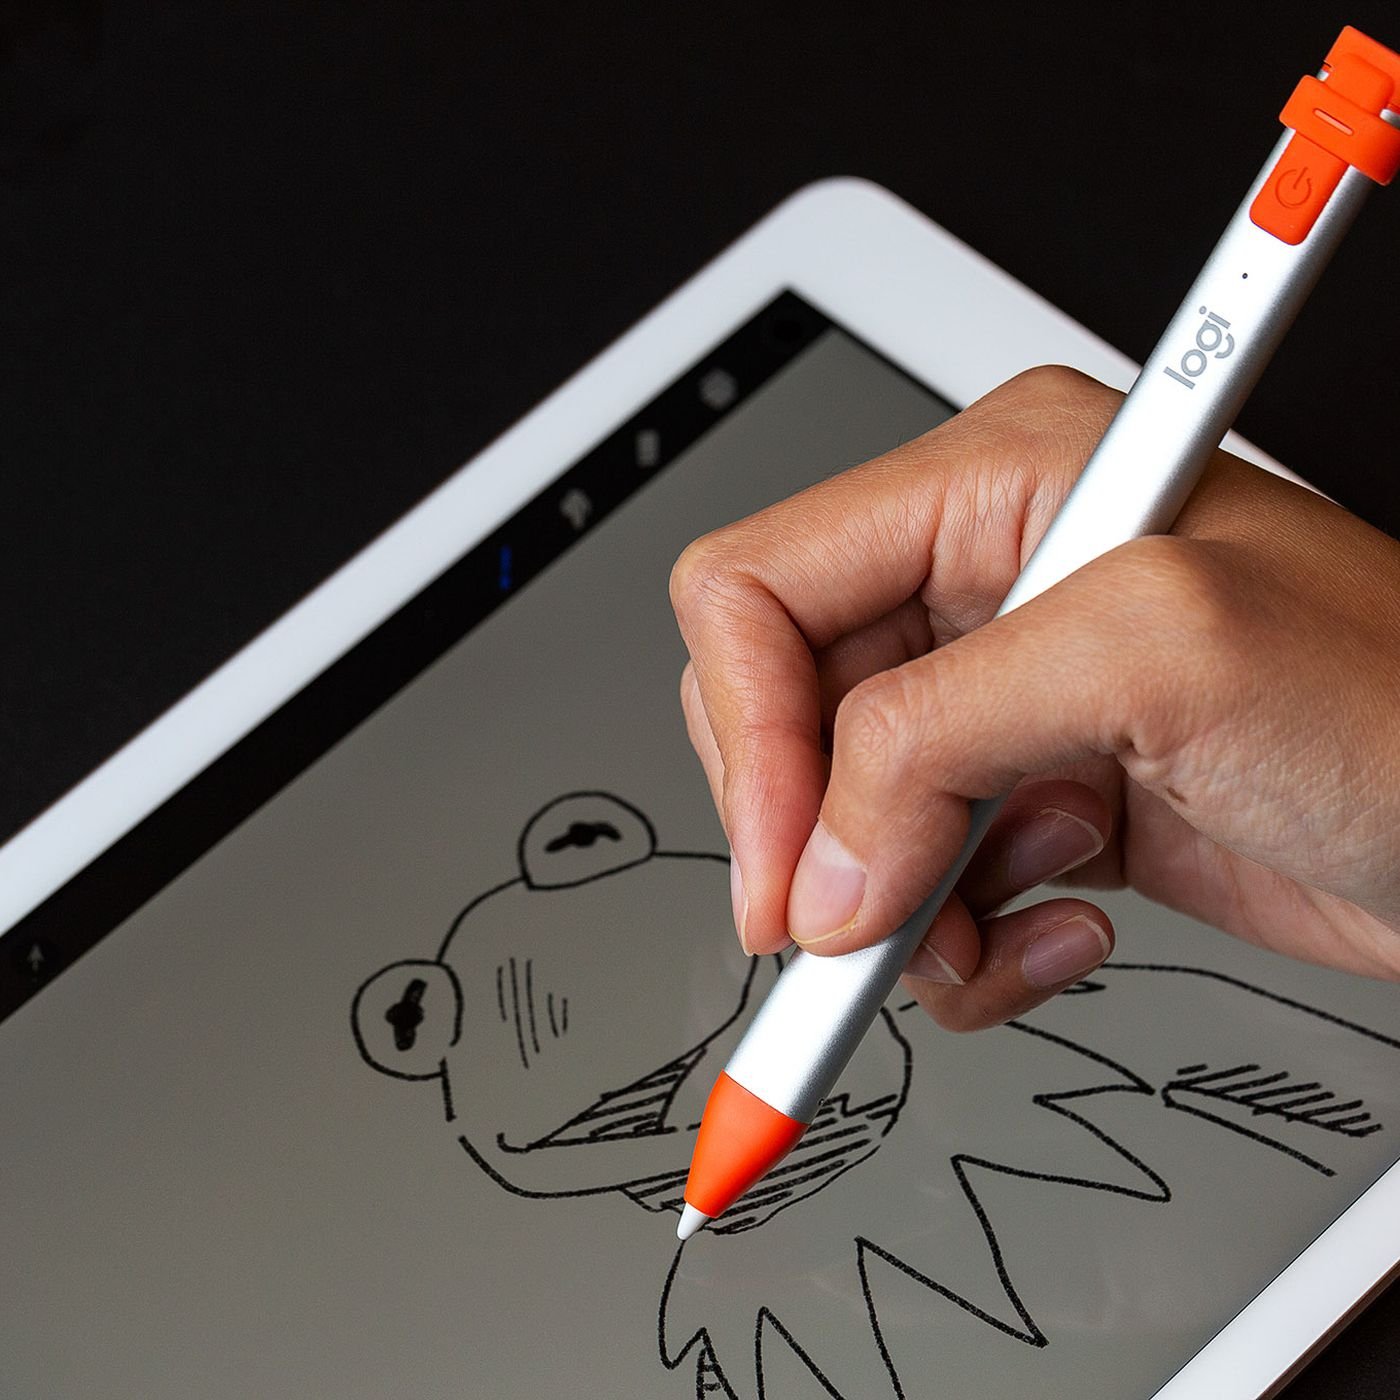 8 Best Apple Pencil Alternatives you can use in 2022